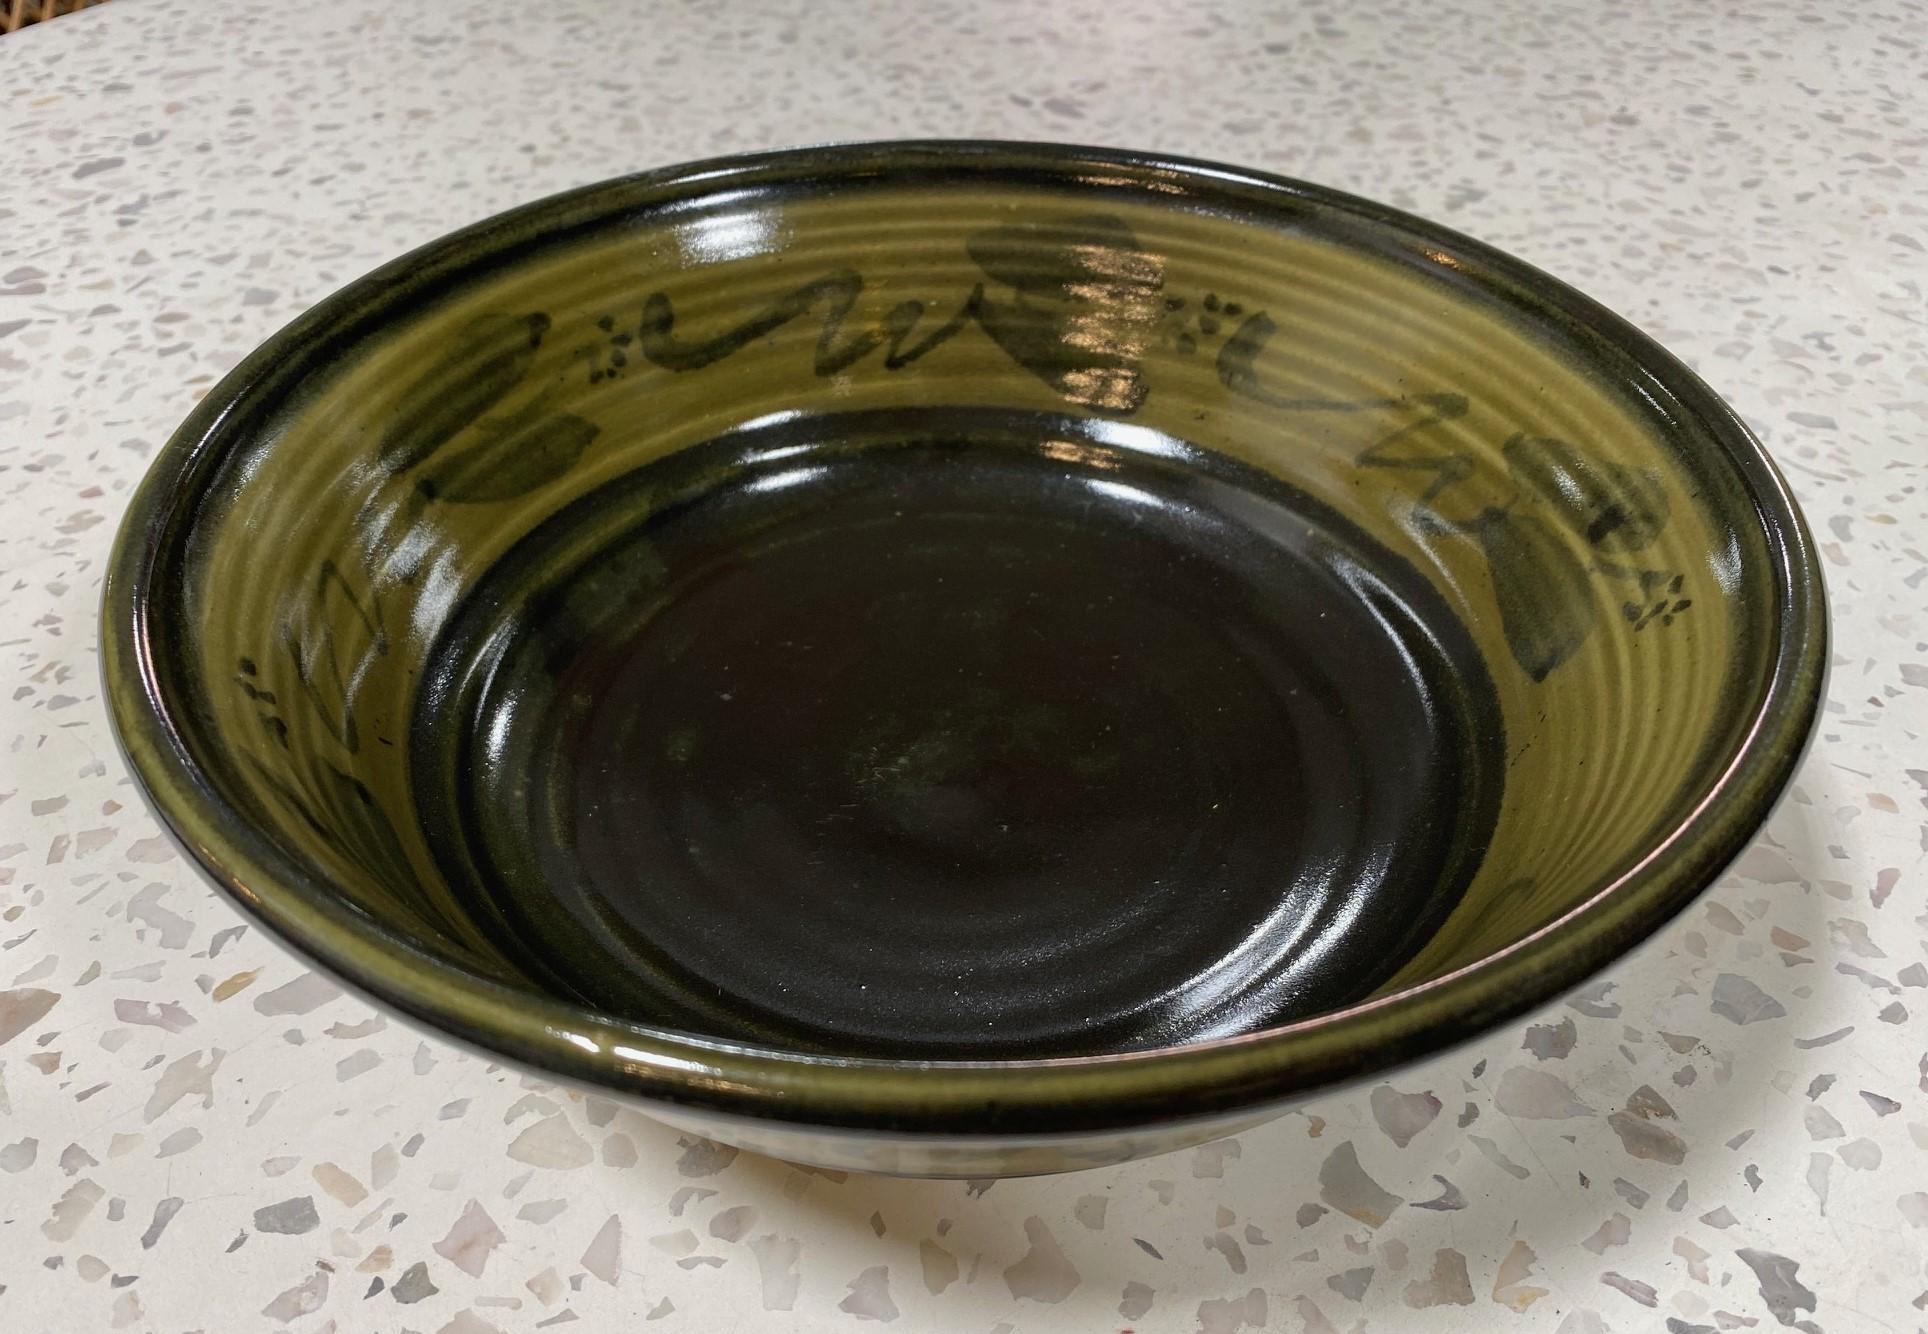 A beautifully designed and gorgeously glazed large bowl by famed Mexican-American California studio art potter Dora De Larios.   The work features hand-painted designs with flowers and sumptuous Fall green and brown colors.    The glaze radiates in